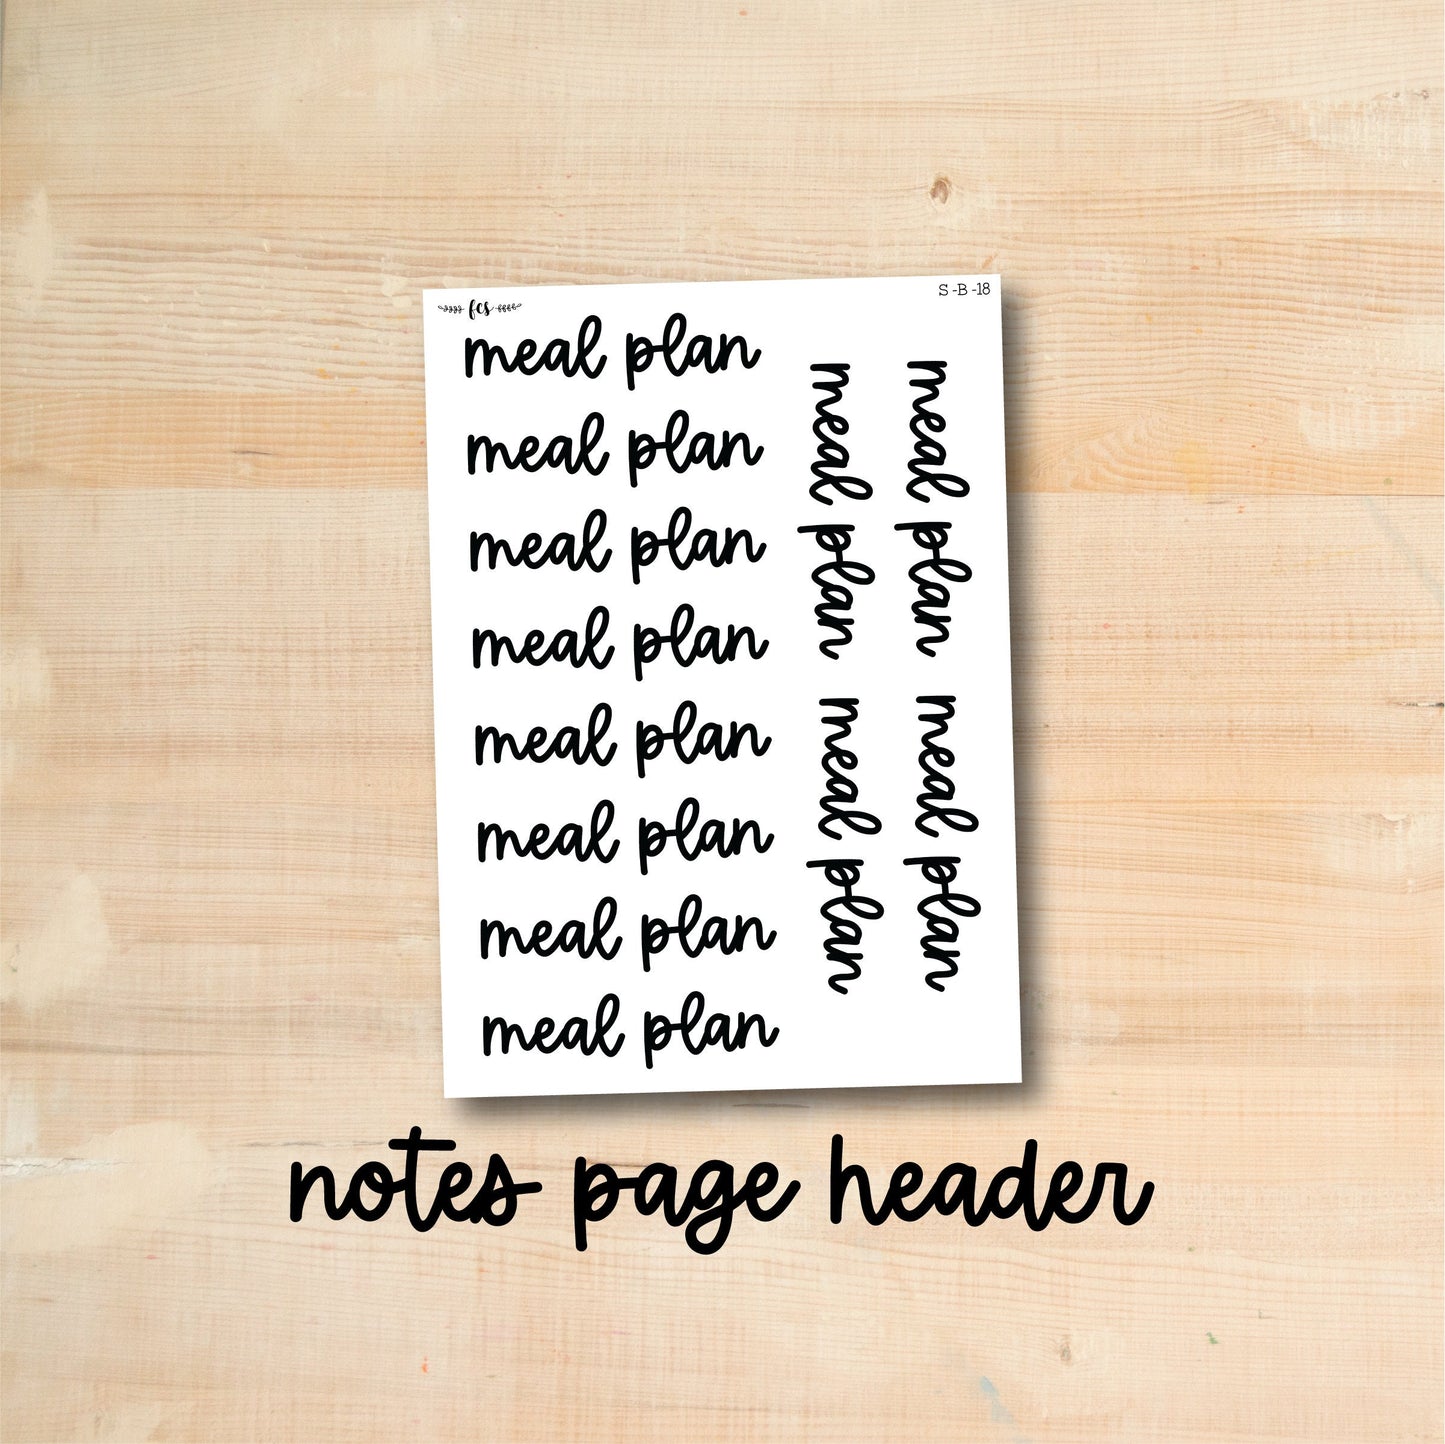 S-B-18 || MEAL PLAN notes page header script stickers